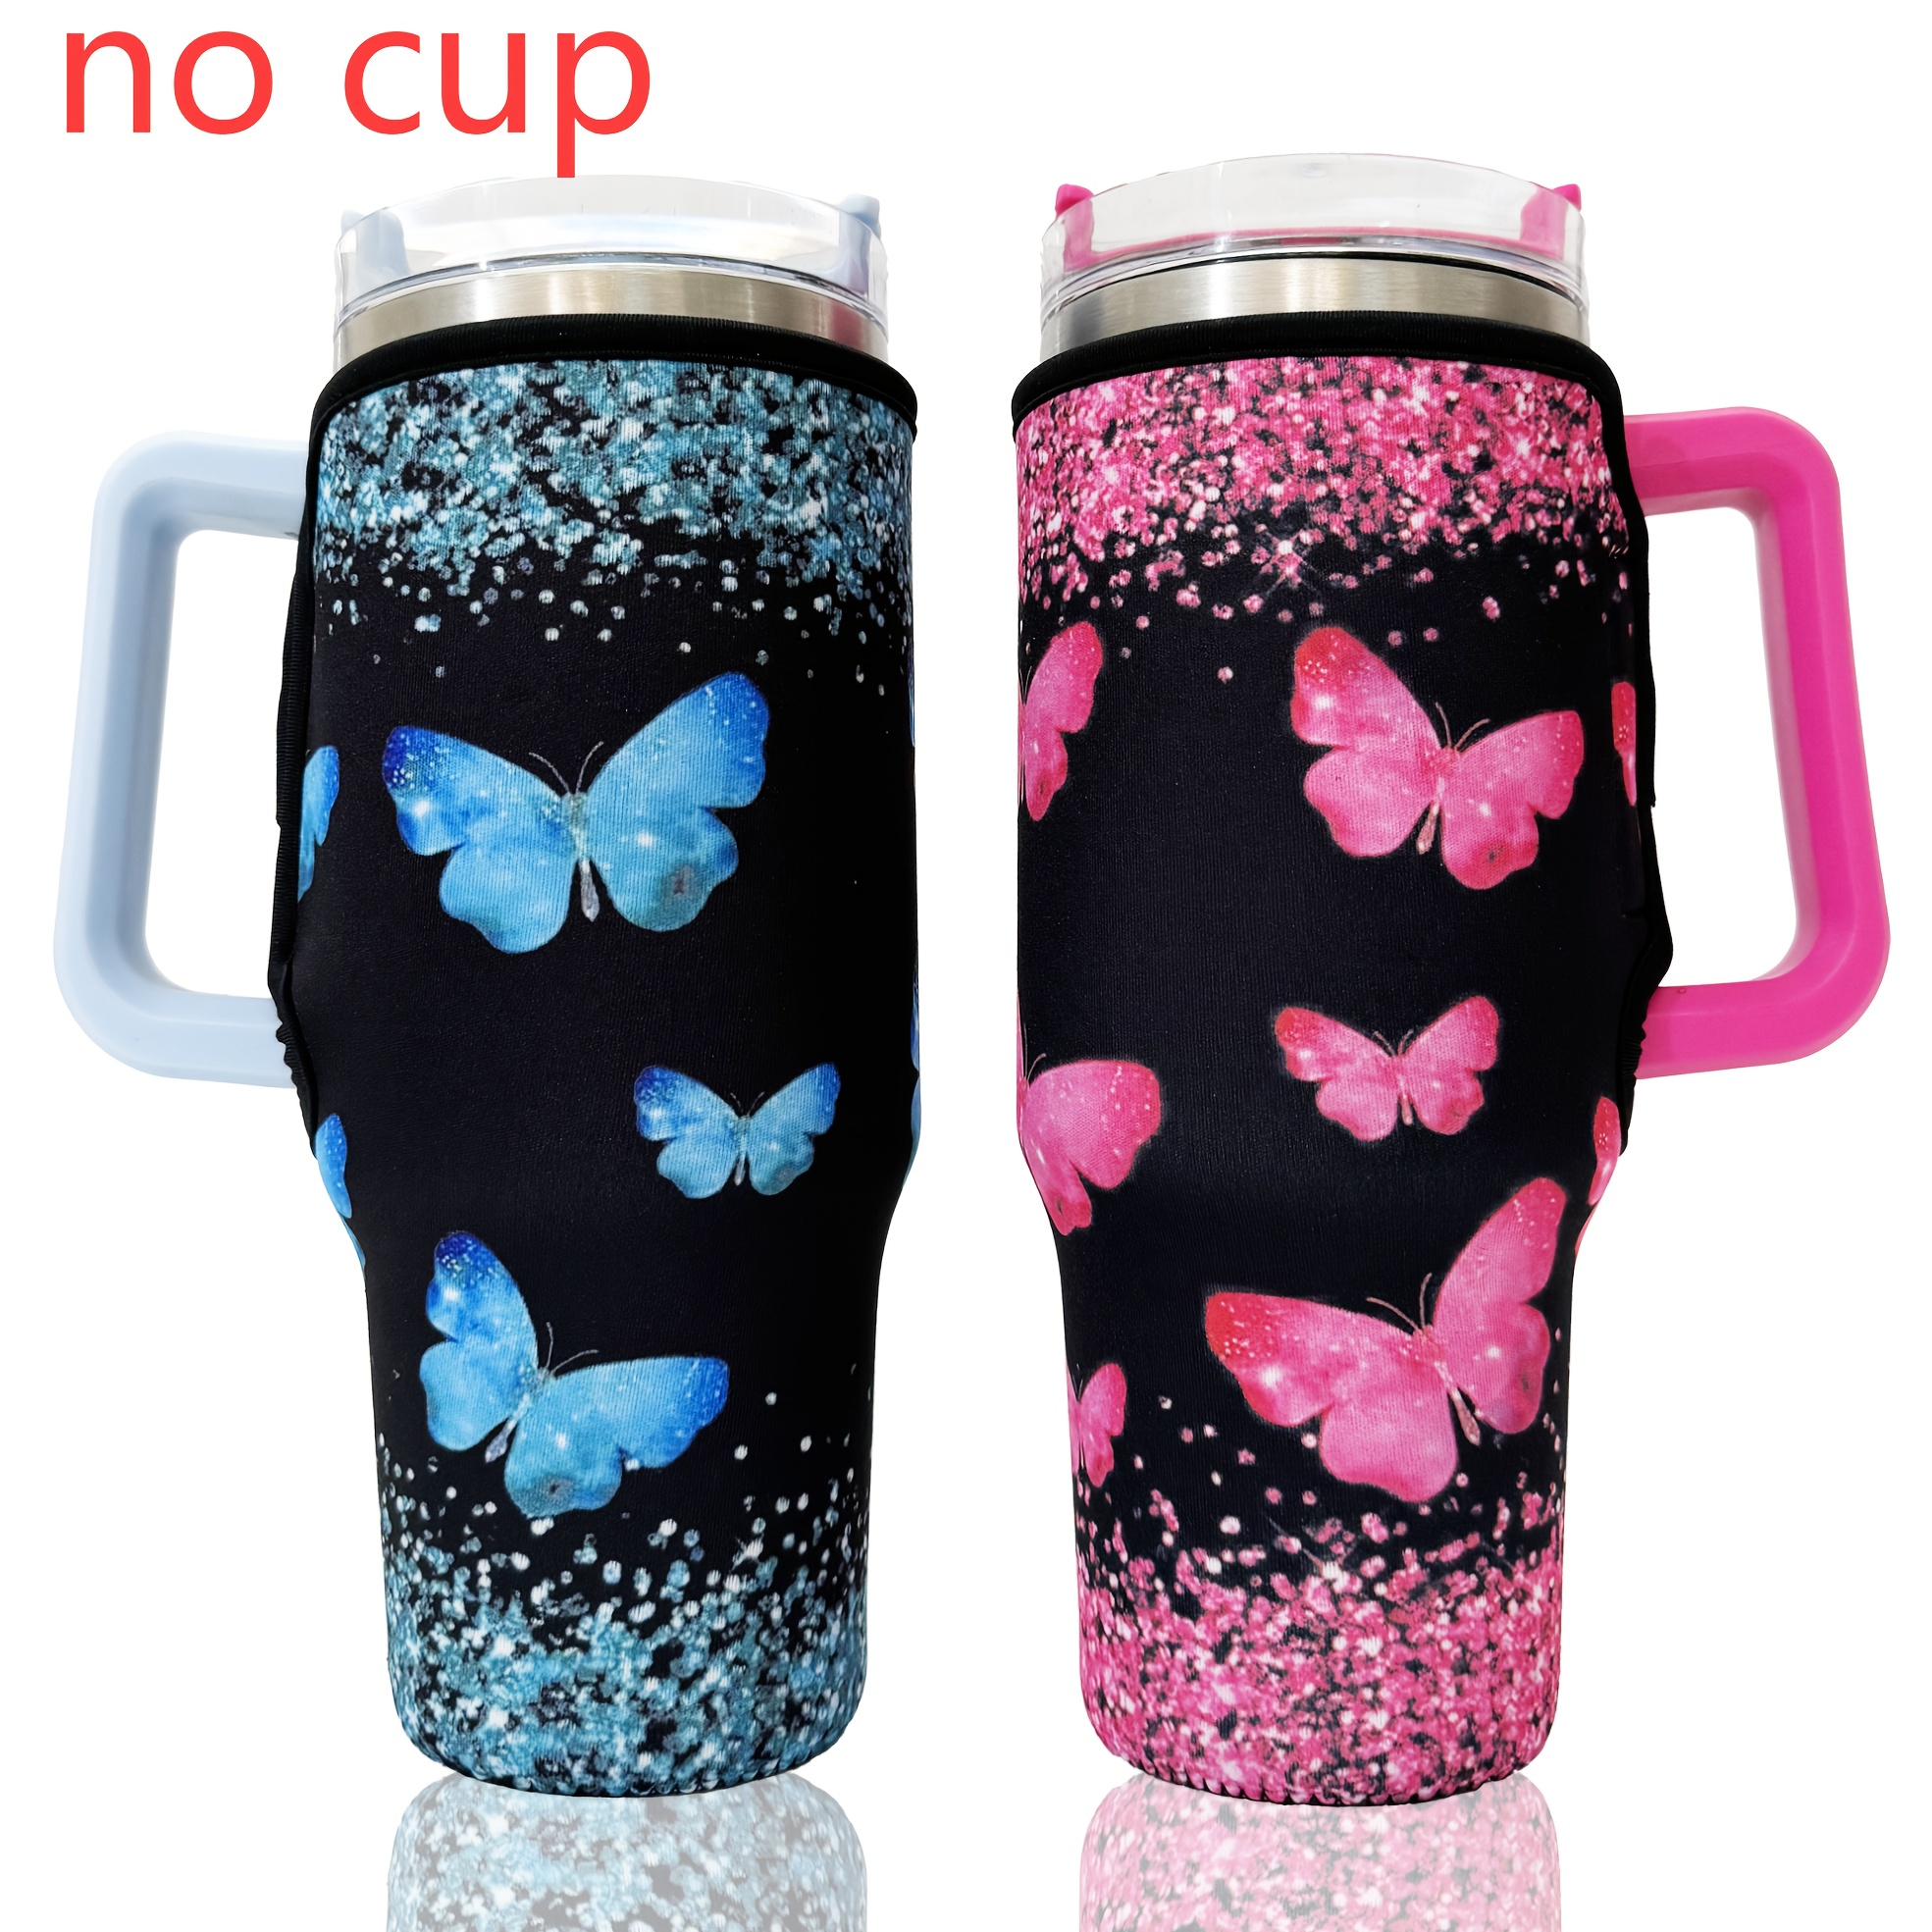 

1pc 40oz Tumbler Cup Sleeve, Neoprene Insulated Cup Cover, Anti-fall Protective Cover (only Cup Cover)